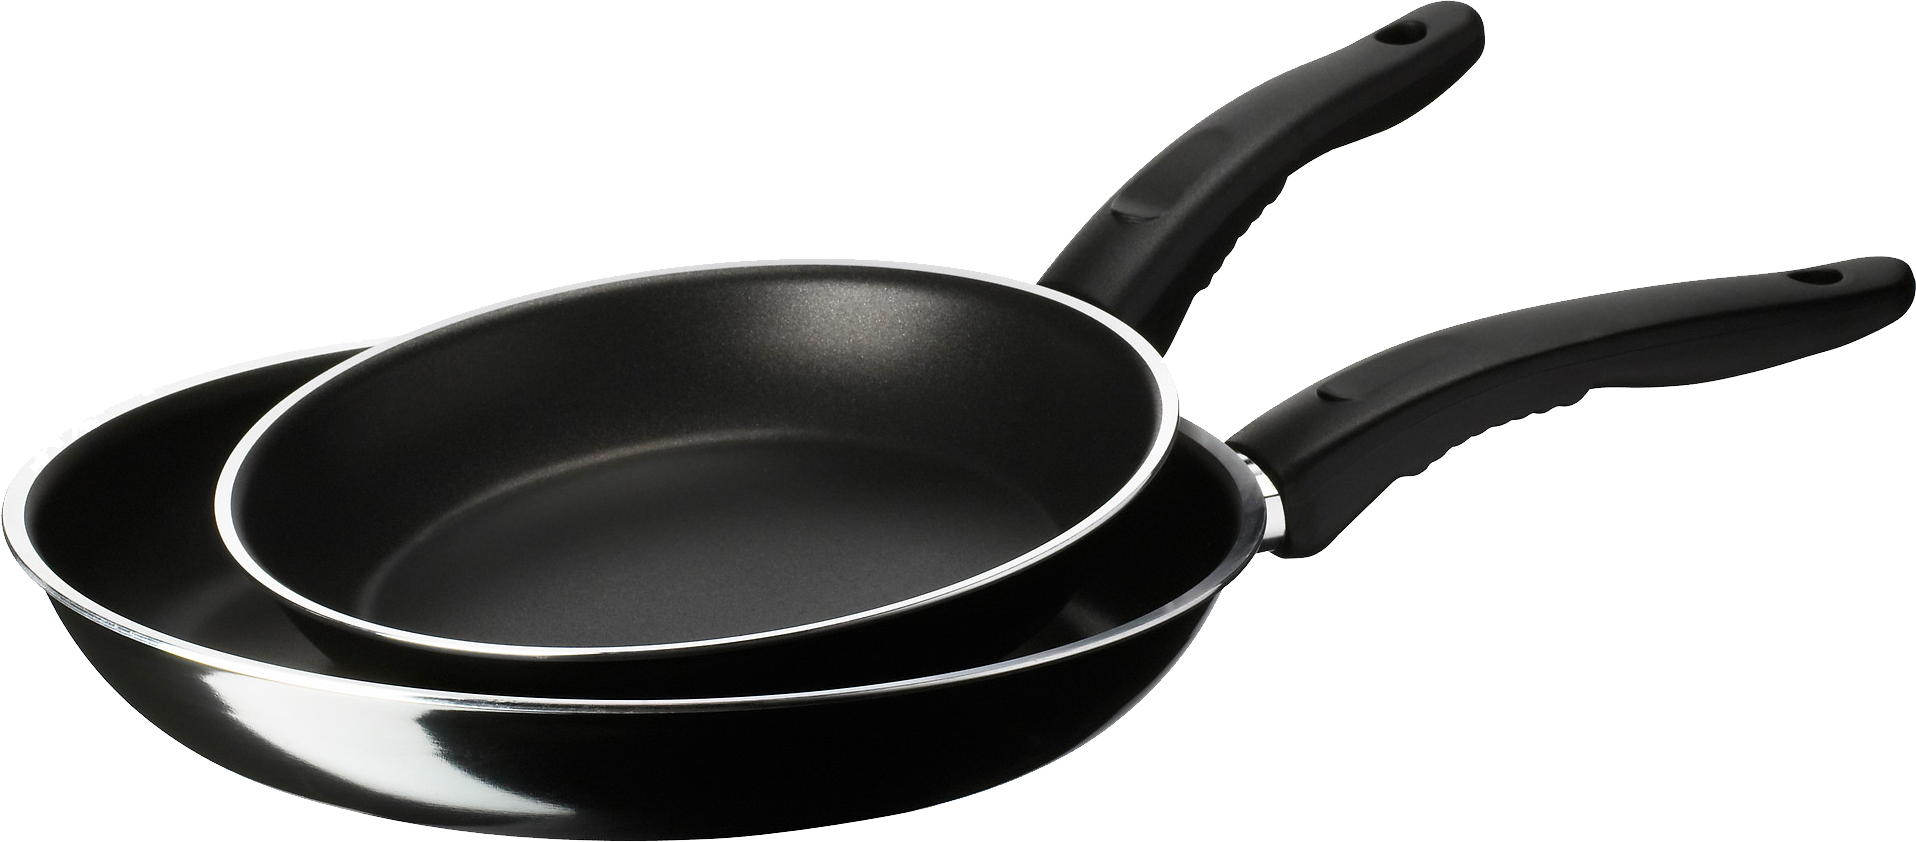 Frying Non Stick Pan PNG Image High Quality PNG Image